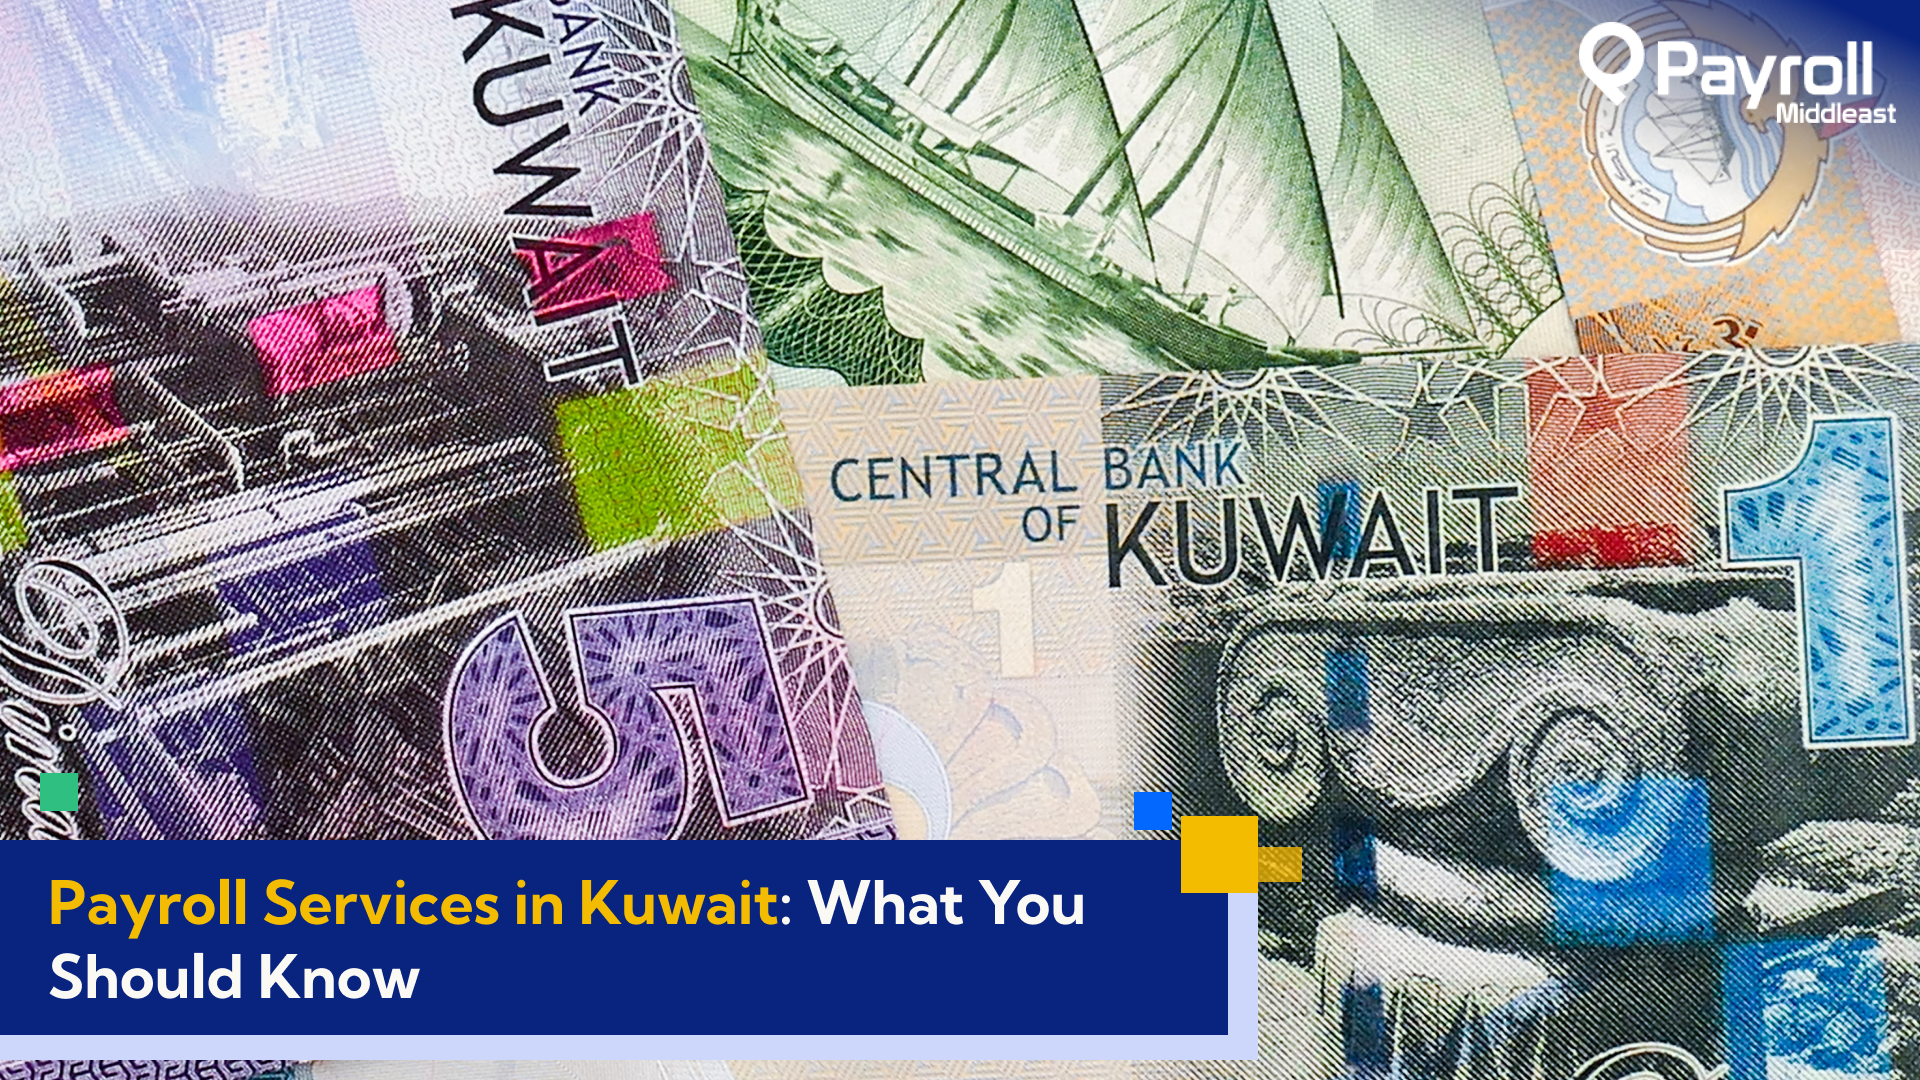 Payroll Services in Kuwait